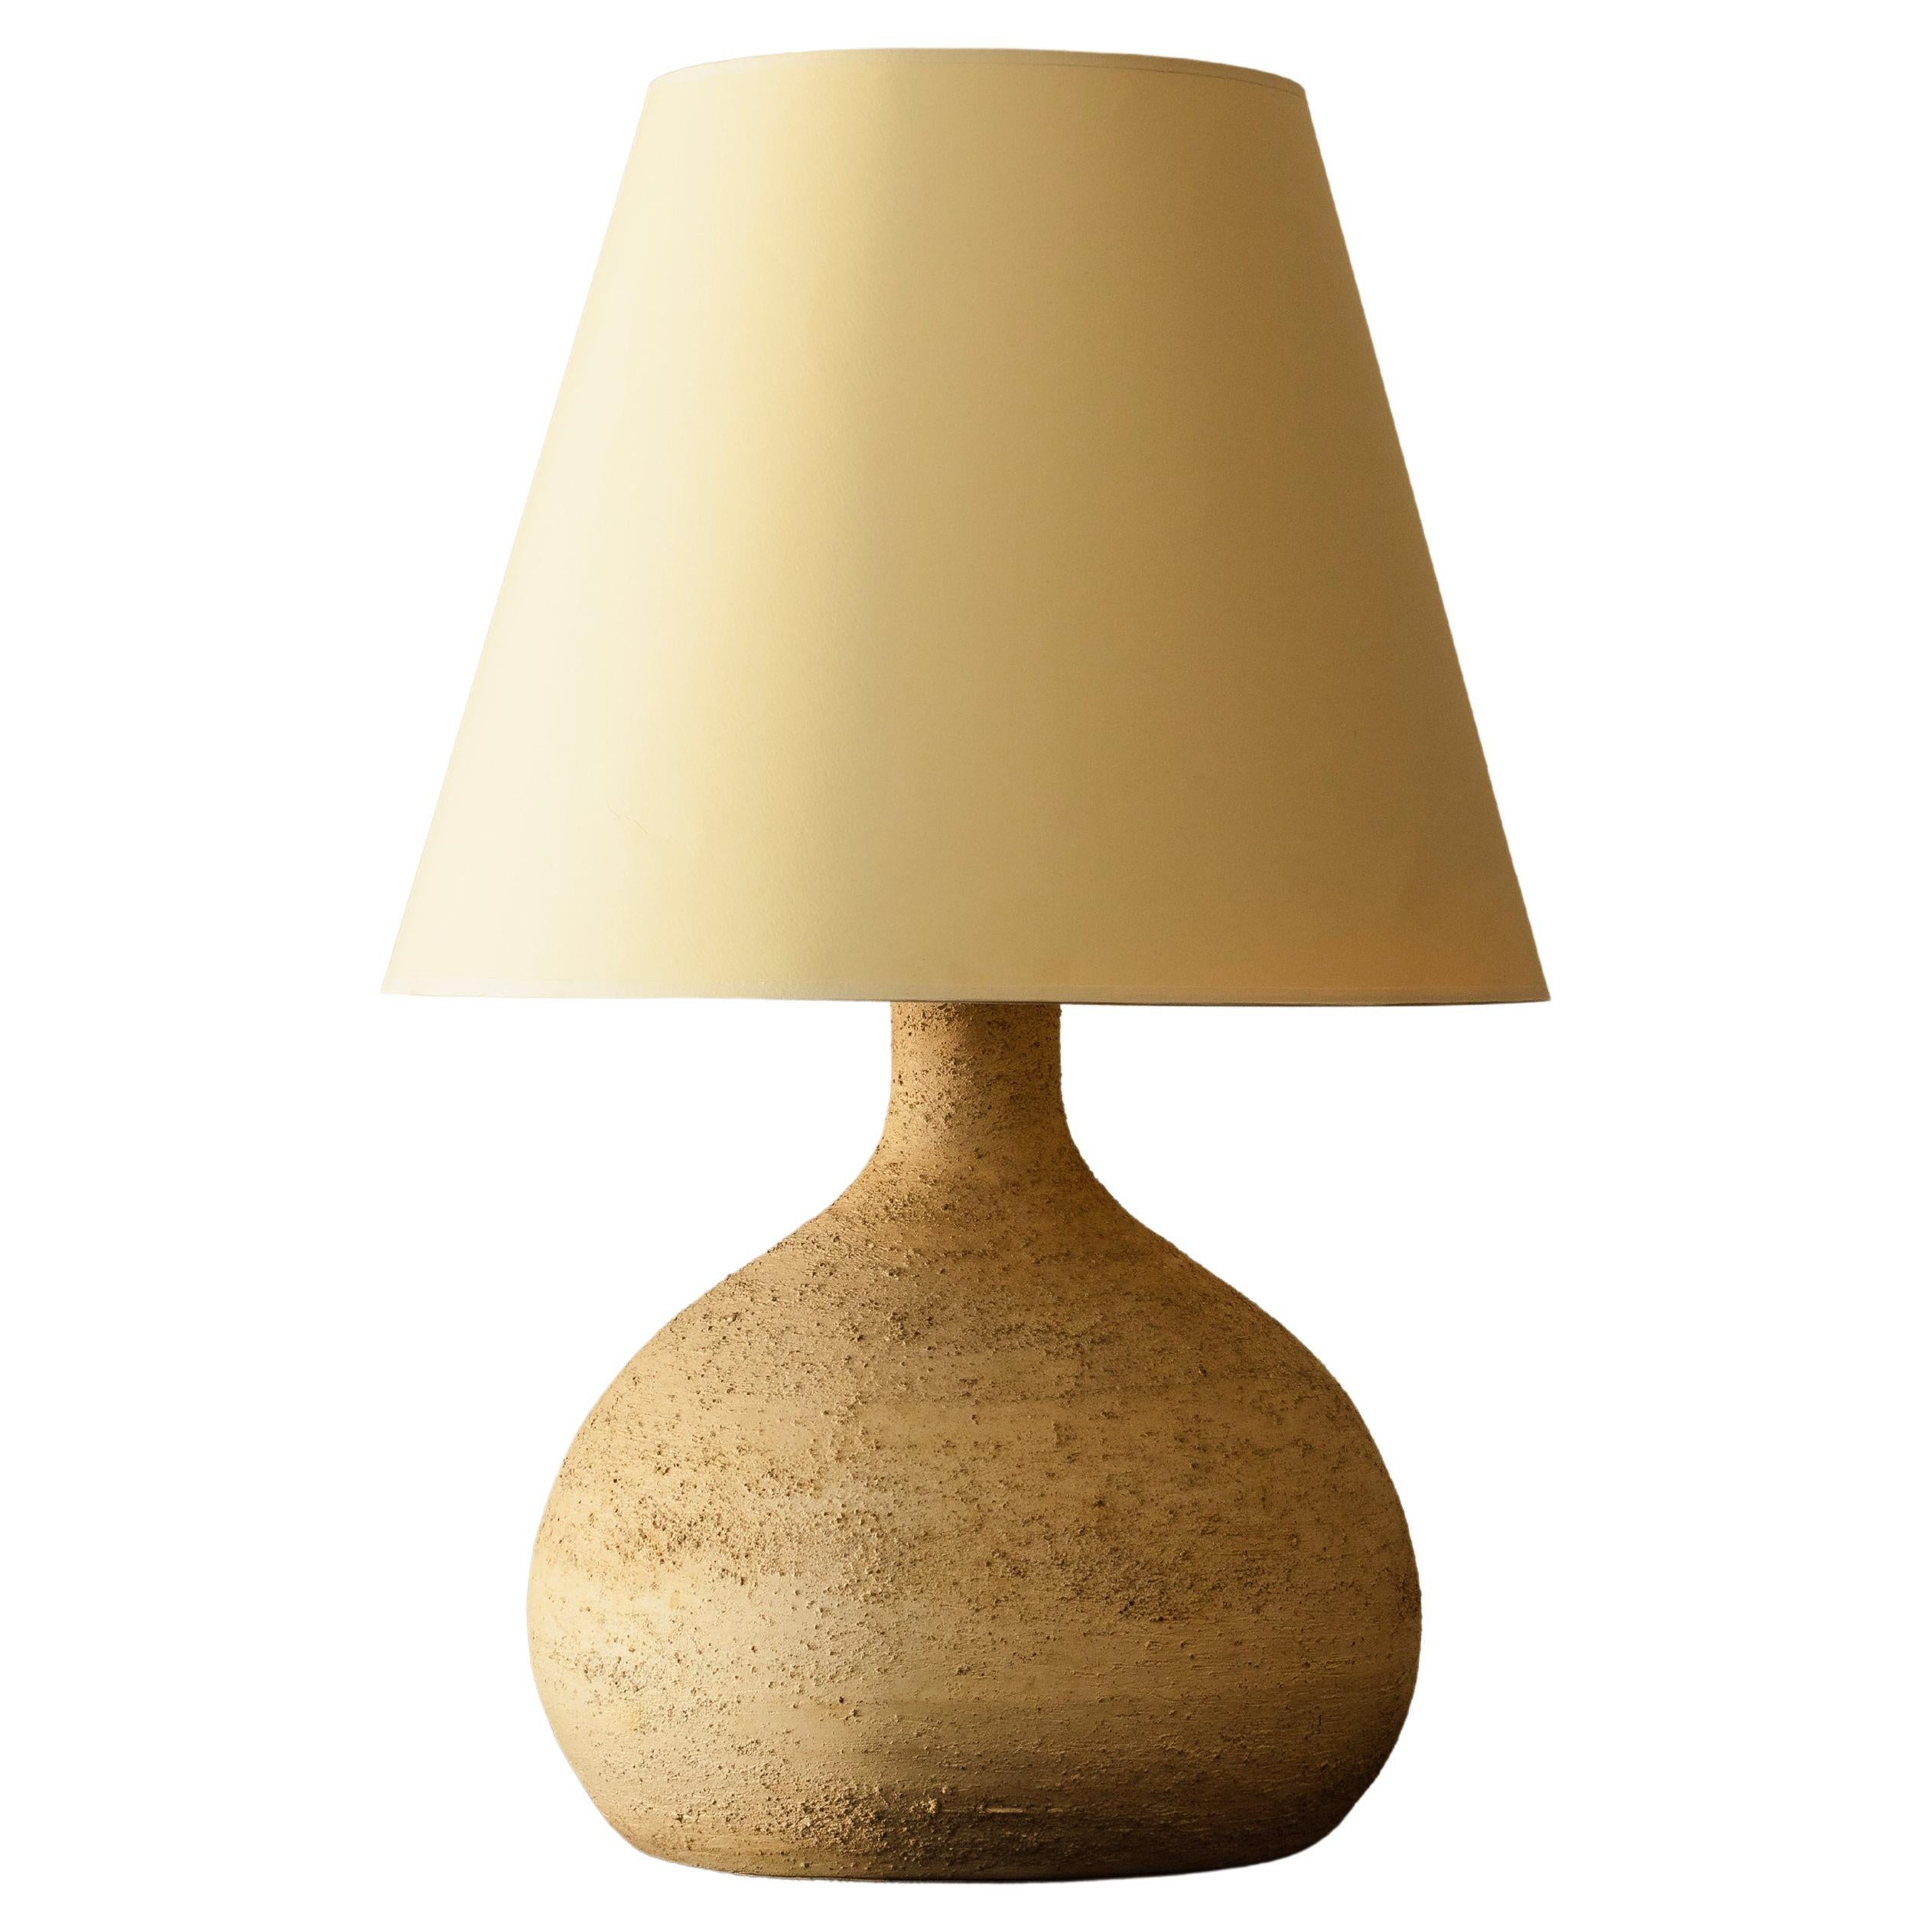 Textured Ceramic Lamp Base with Original Rope Shade, South of France, 1960s